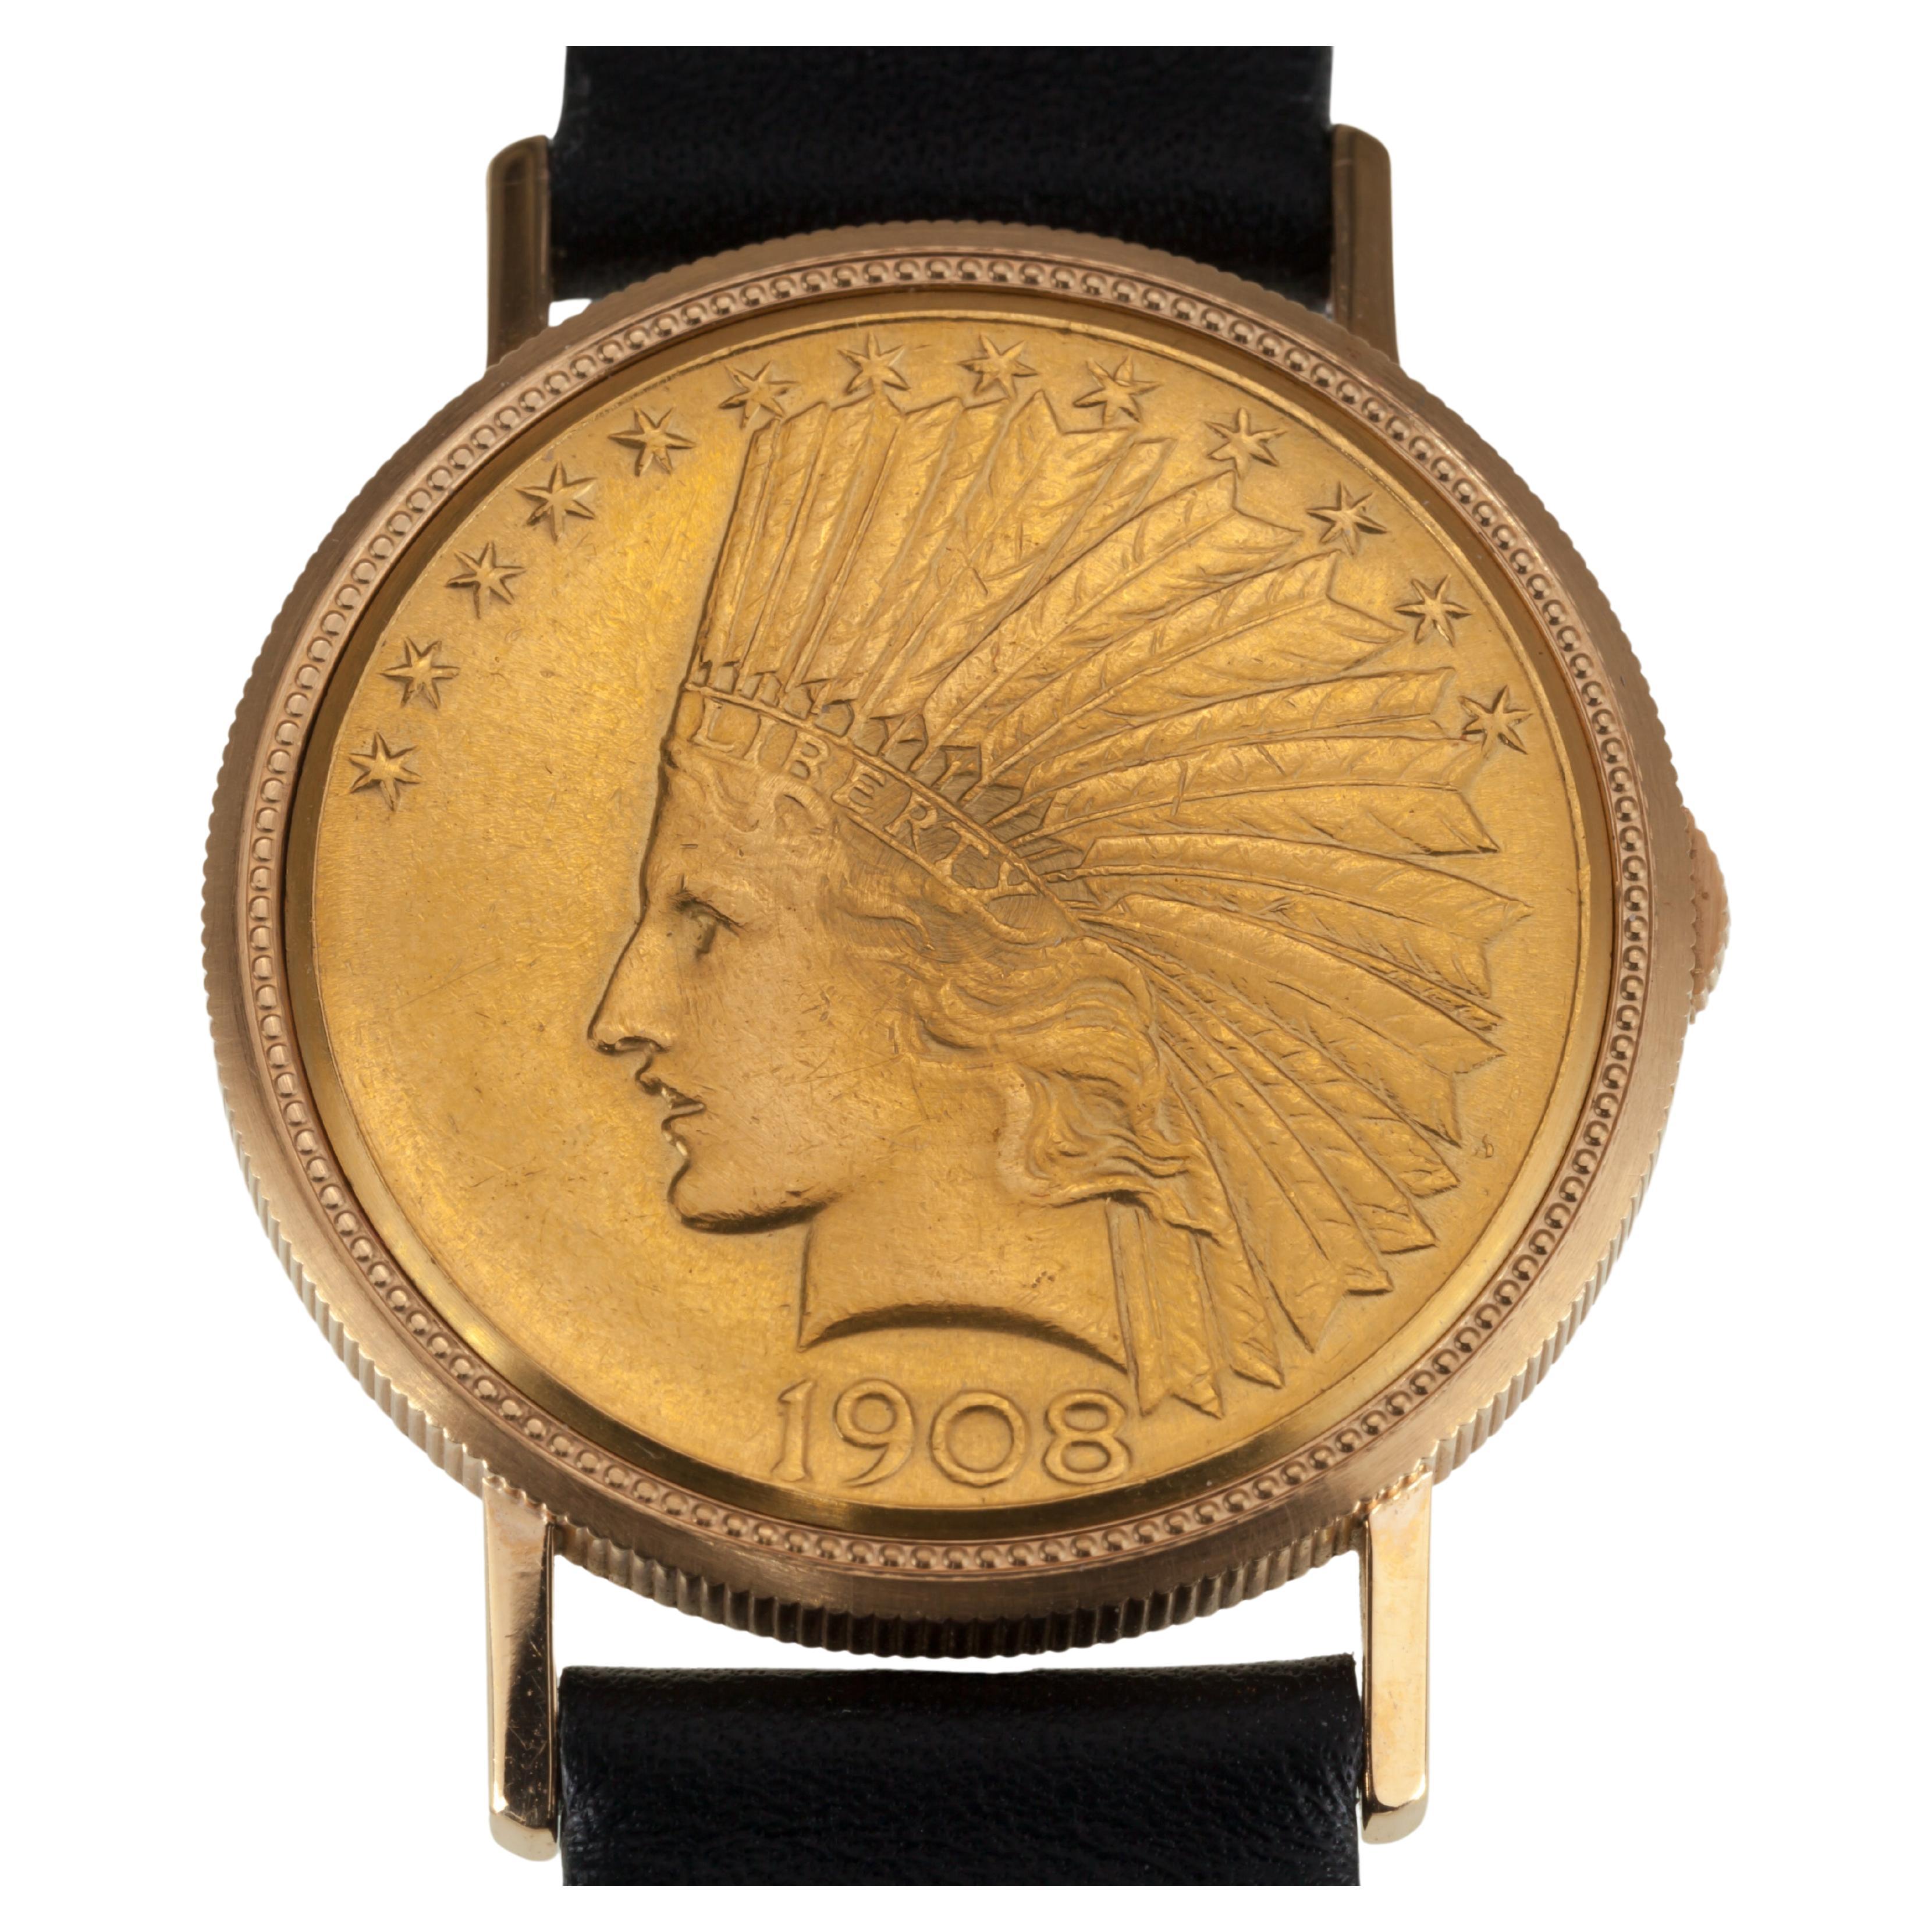 Vintage Leuba Louis 18k $10 Gold Indian Watch with Leather Band, Eagle Reverse